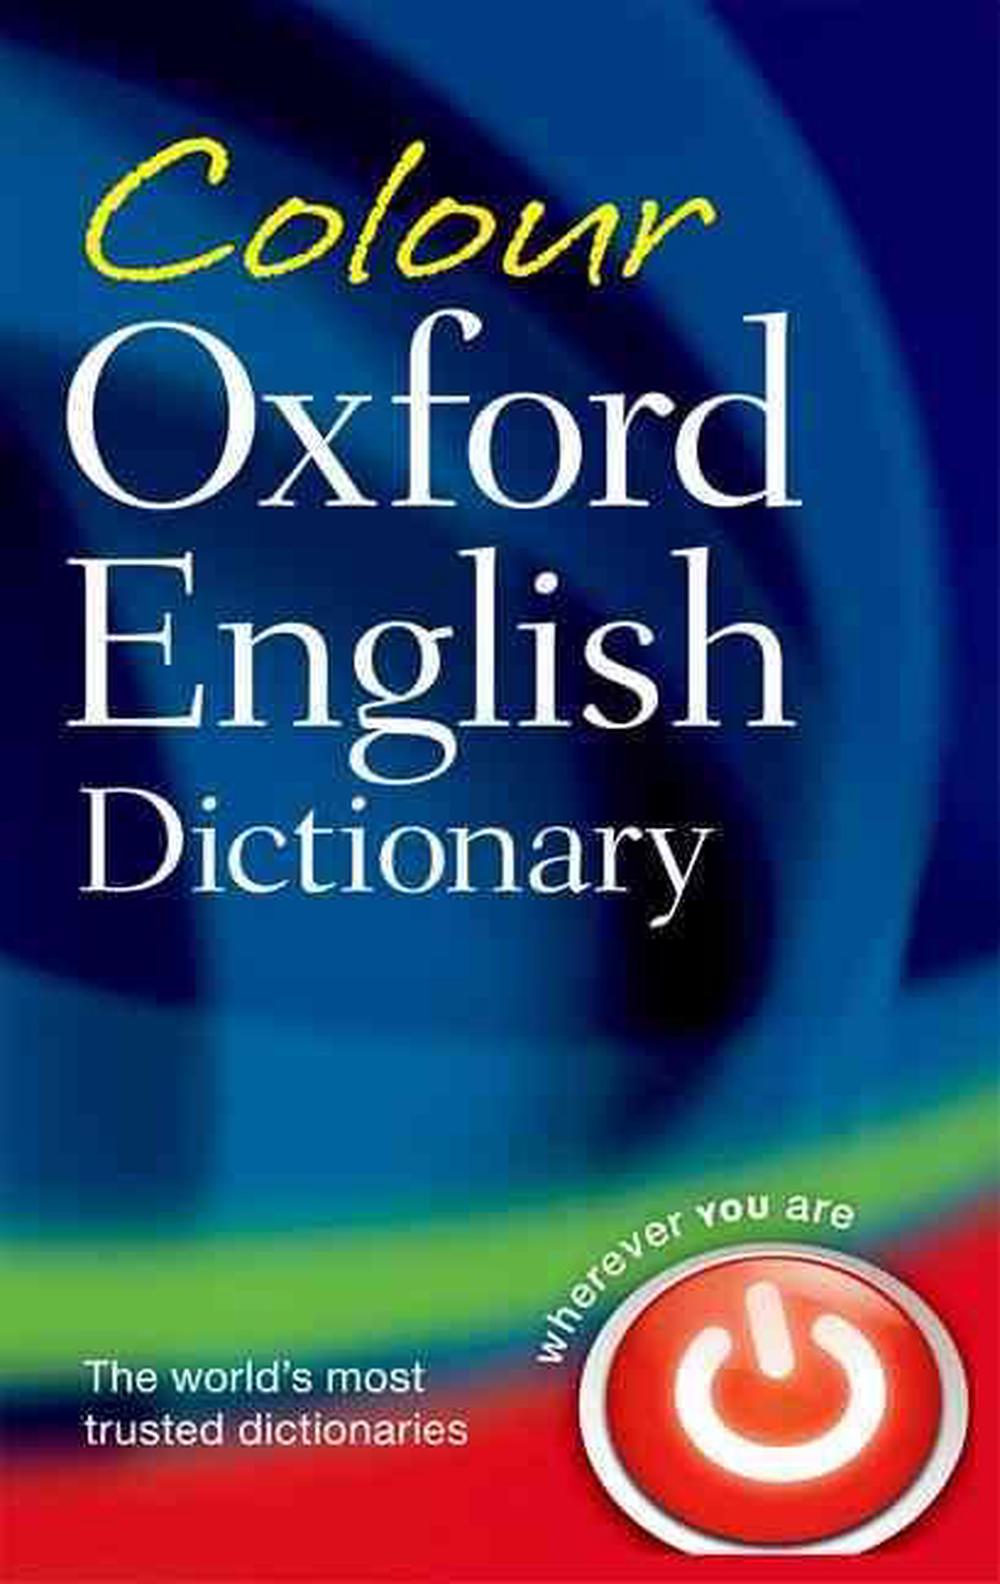 colour-oxford-english-dictionary-by-oxford-languages-paperback